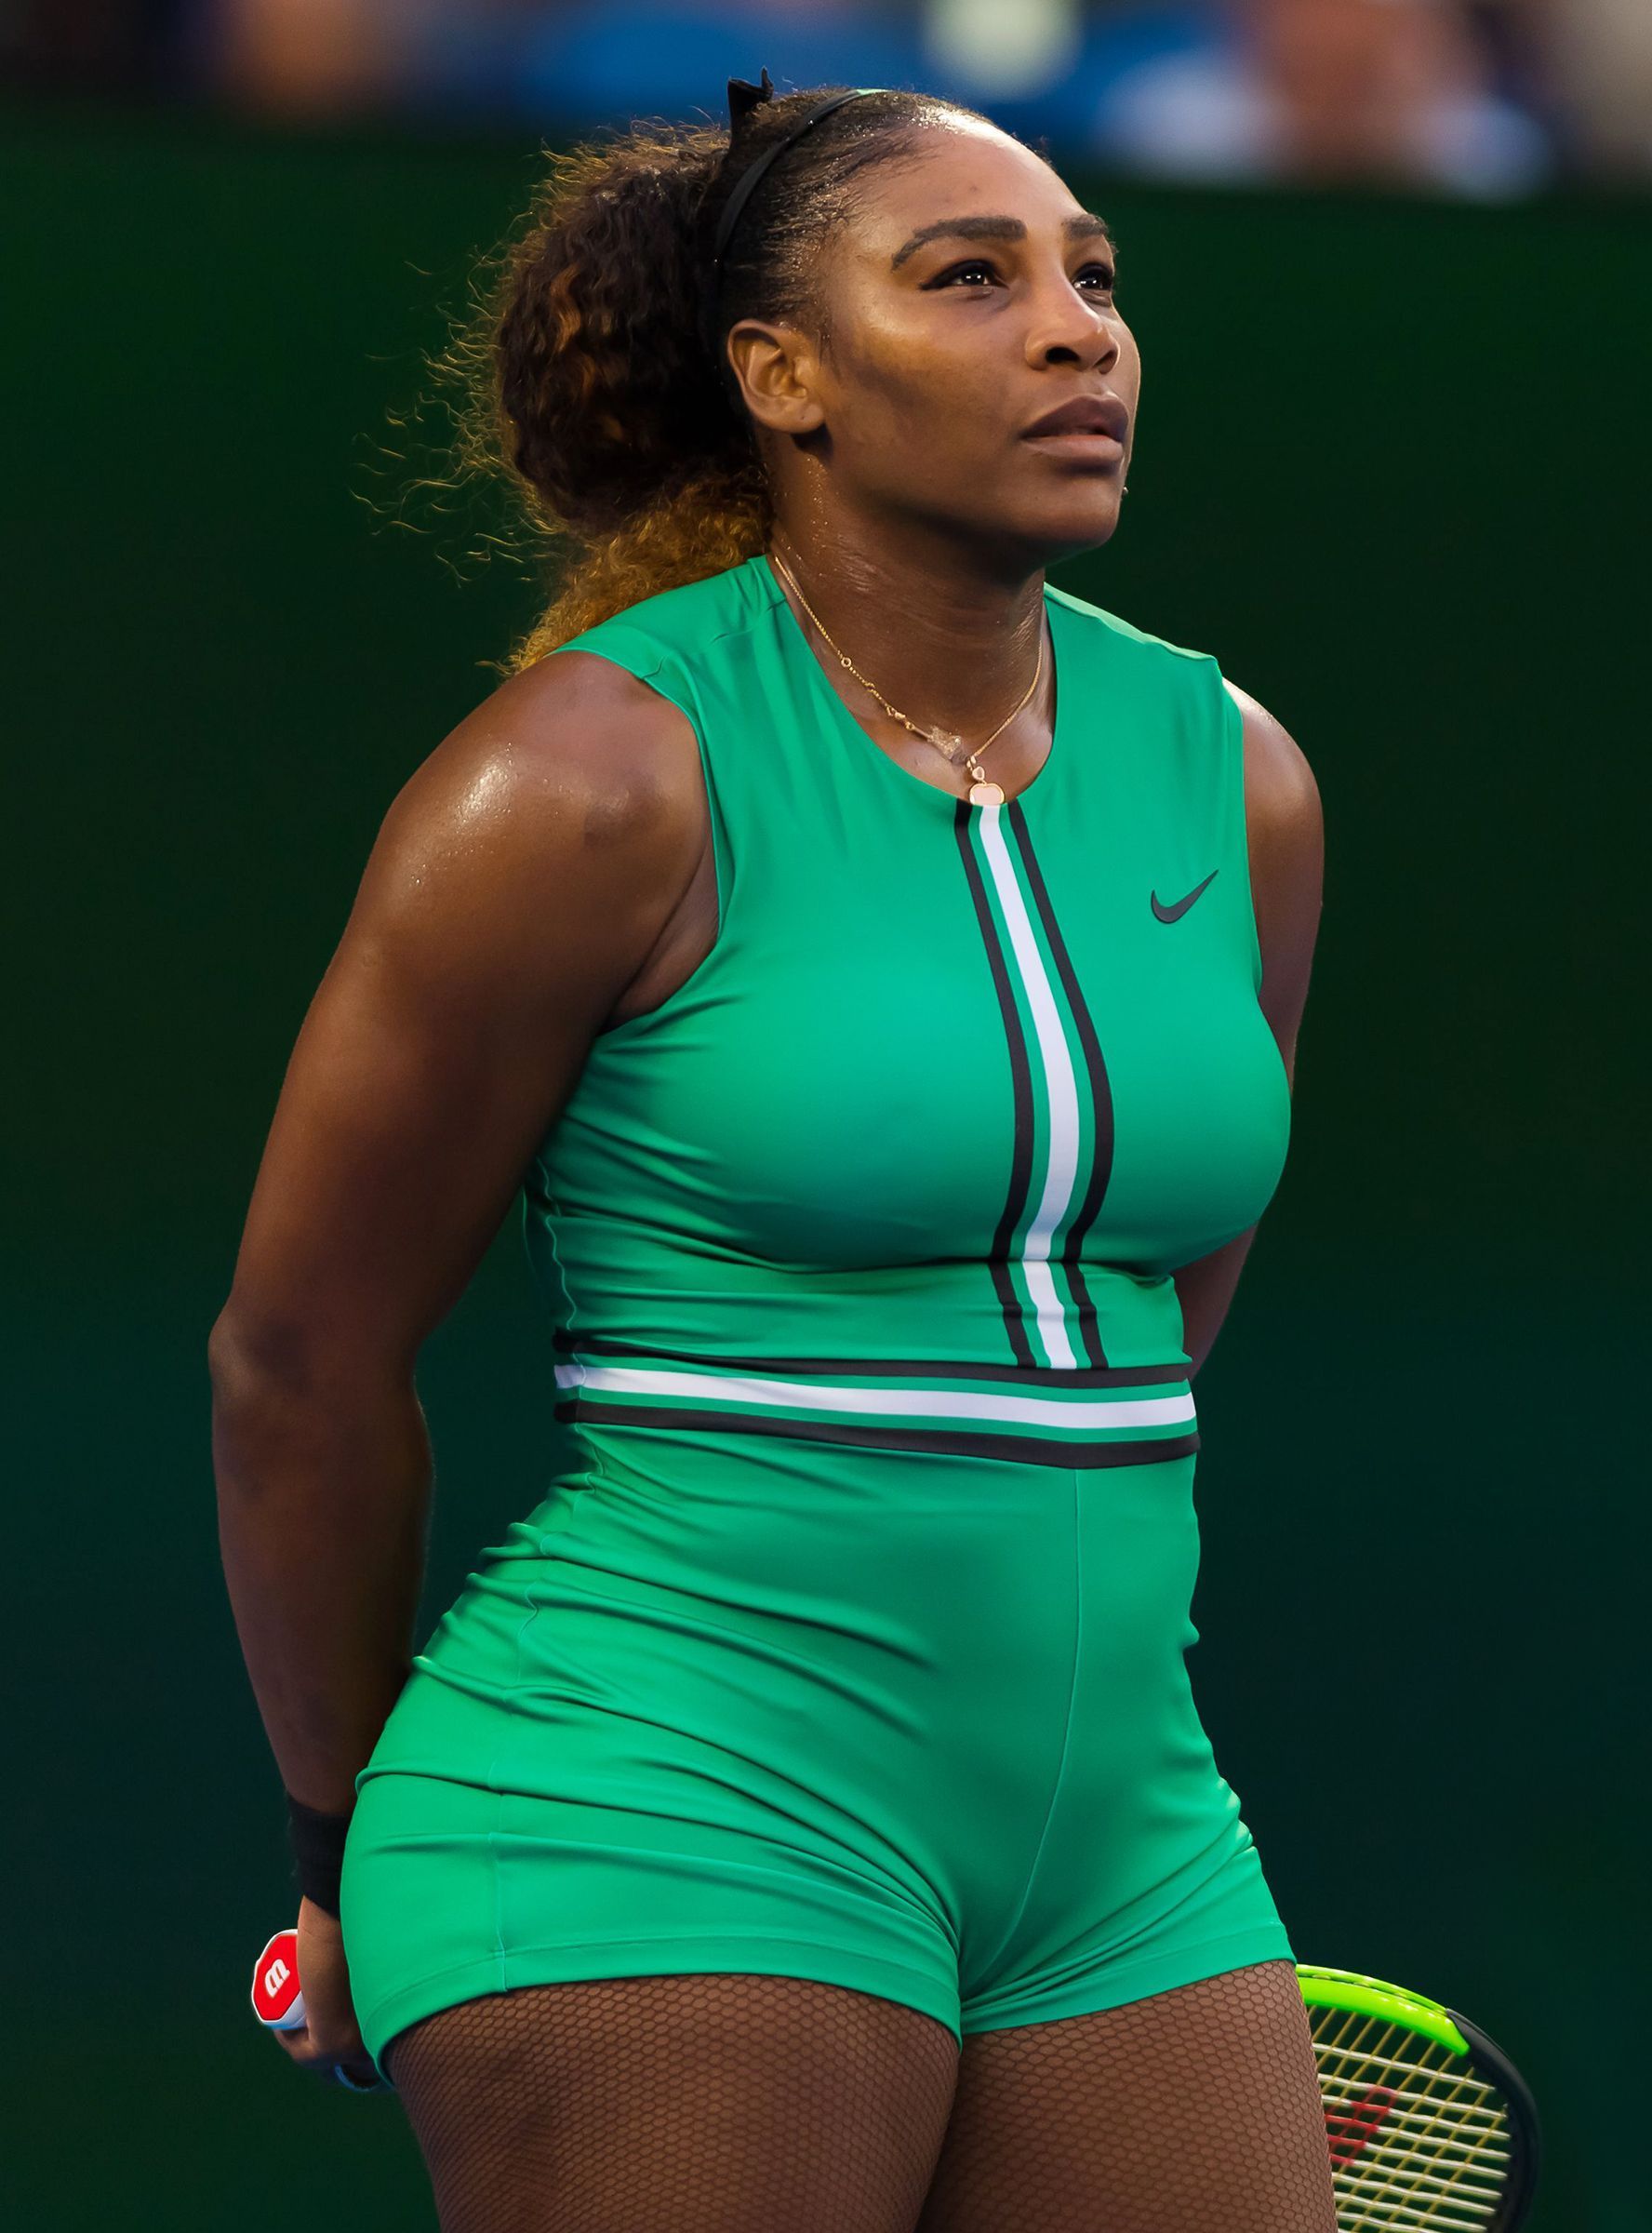 chad raymond recommends Serena Williams Butt Pic